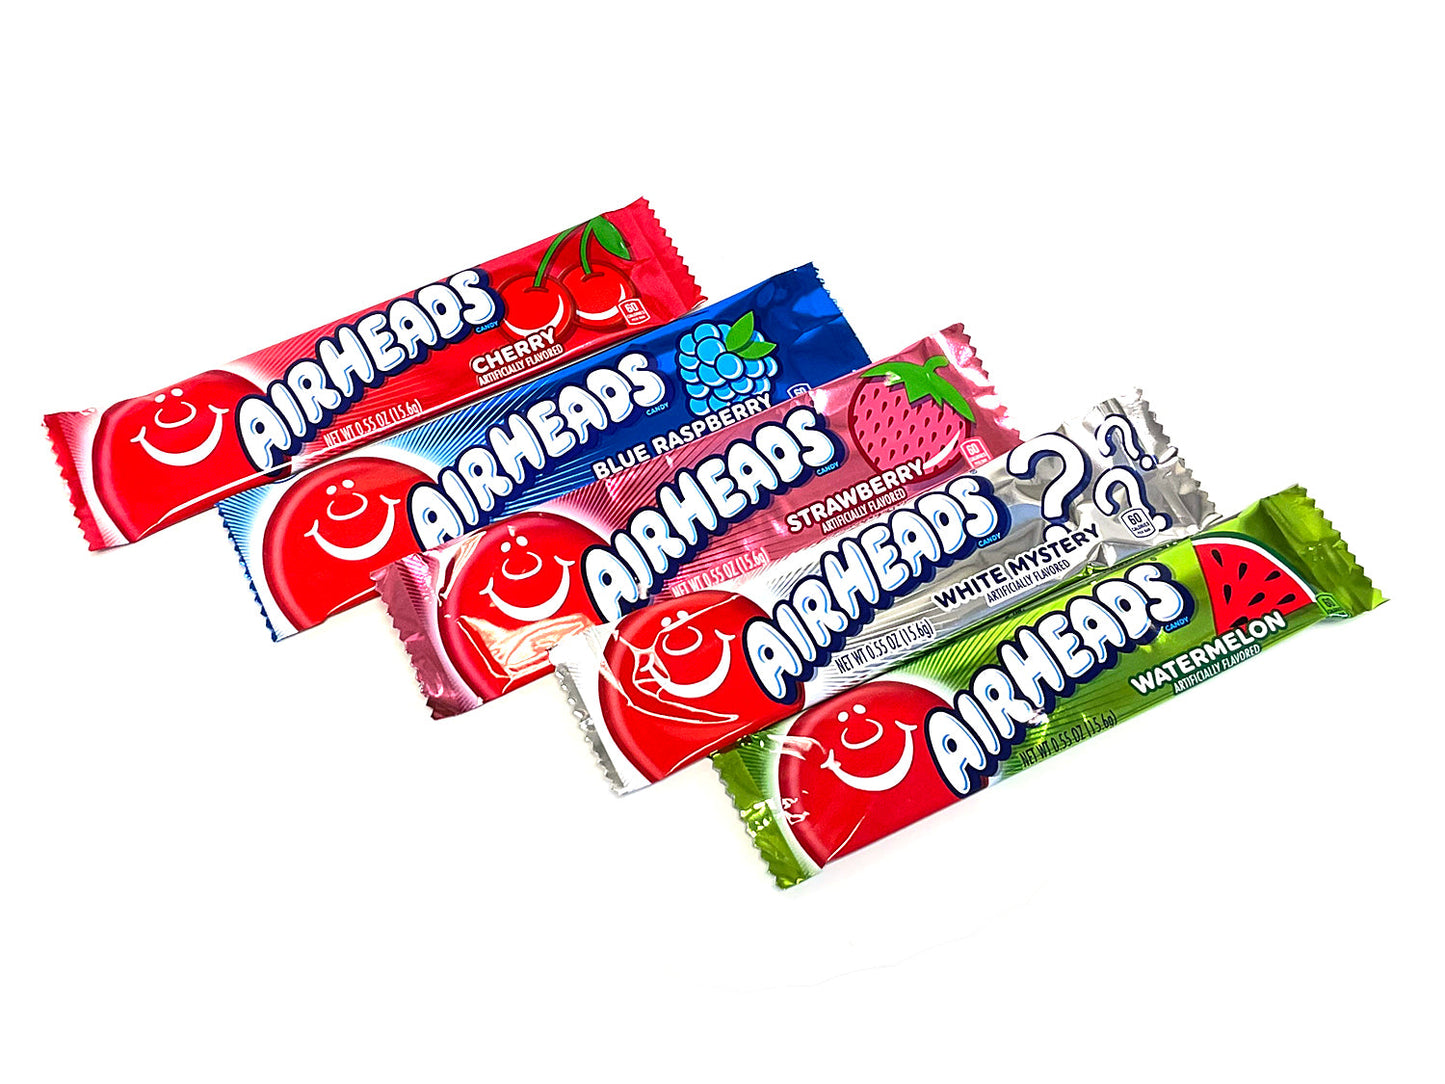 Airheads 5-Bar Pack - 2.75 oz - open pack